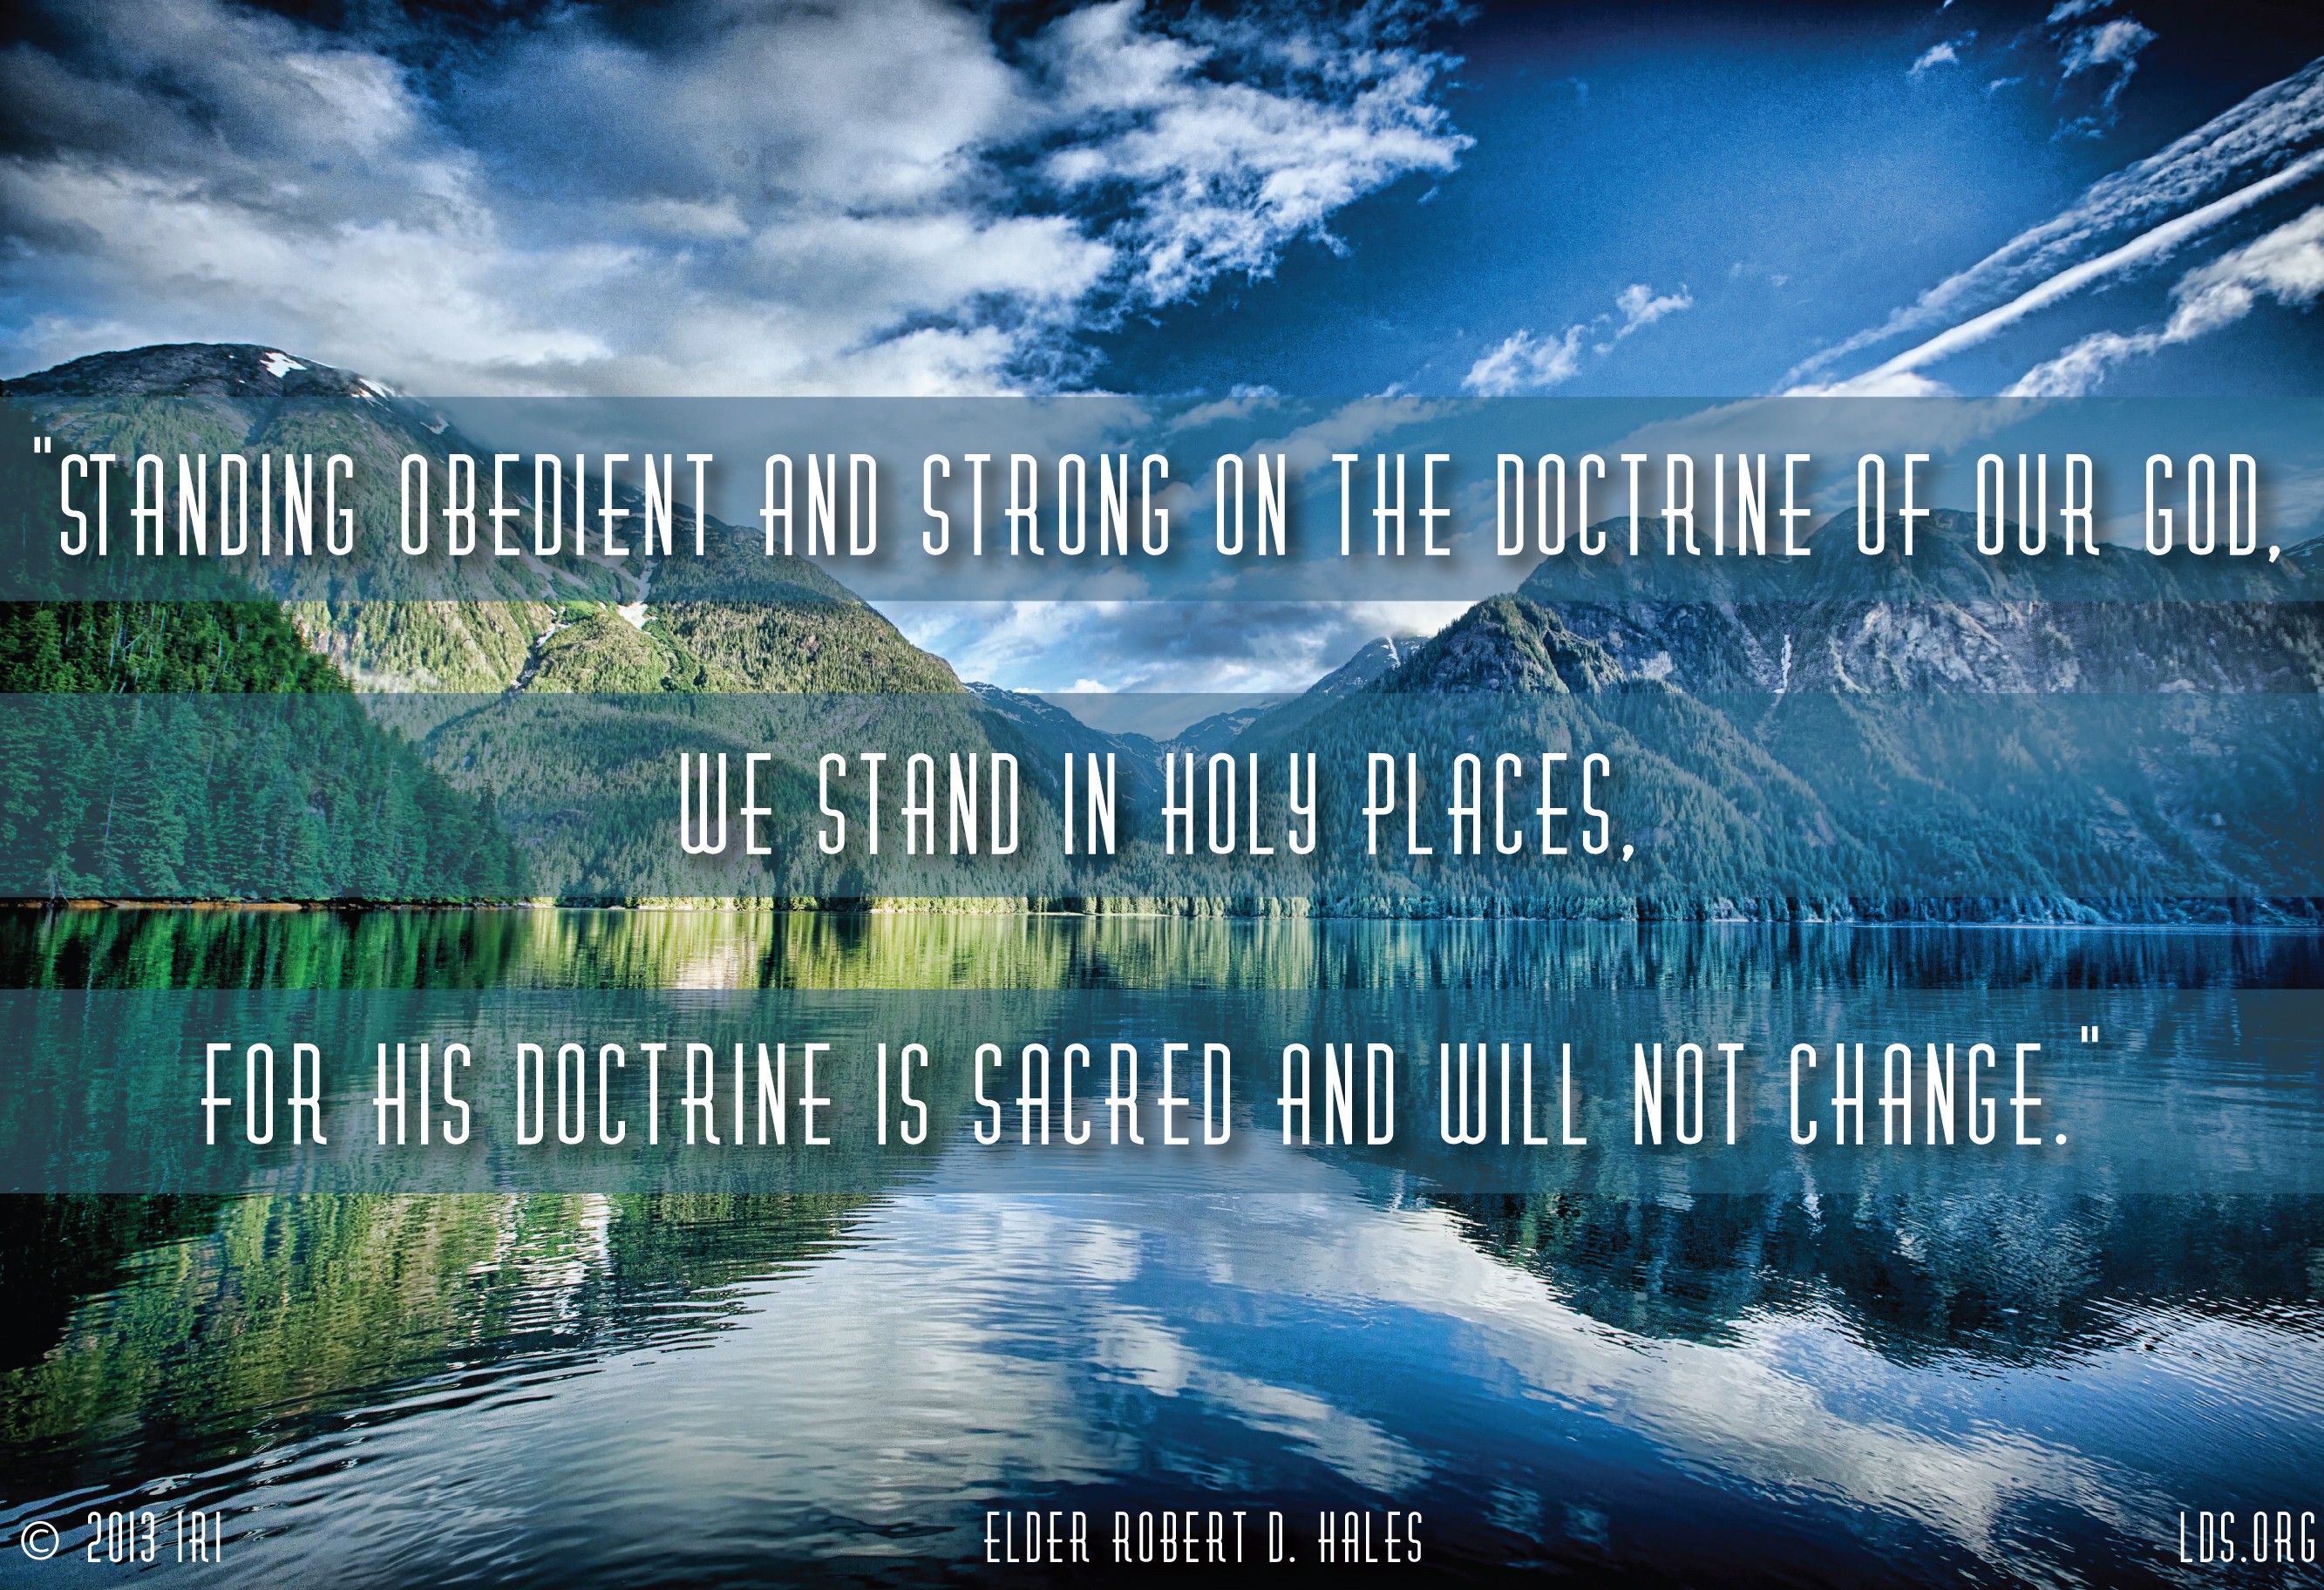 An image of a lake and a canyon, combined with a quote by Elder Robert D. Hales: “Standing obedient and strong, … we stand in holy places.”